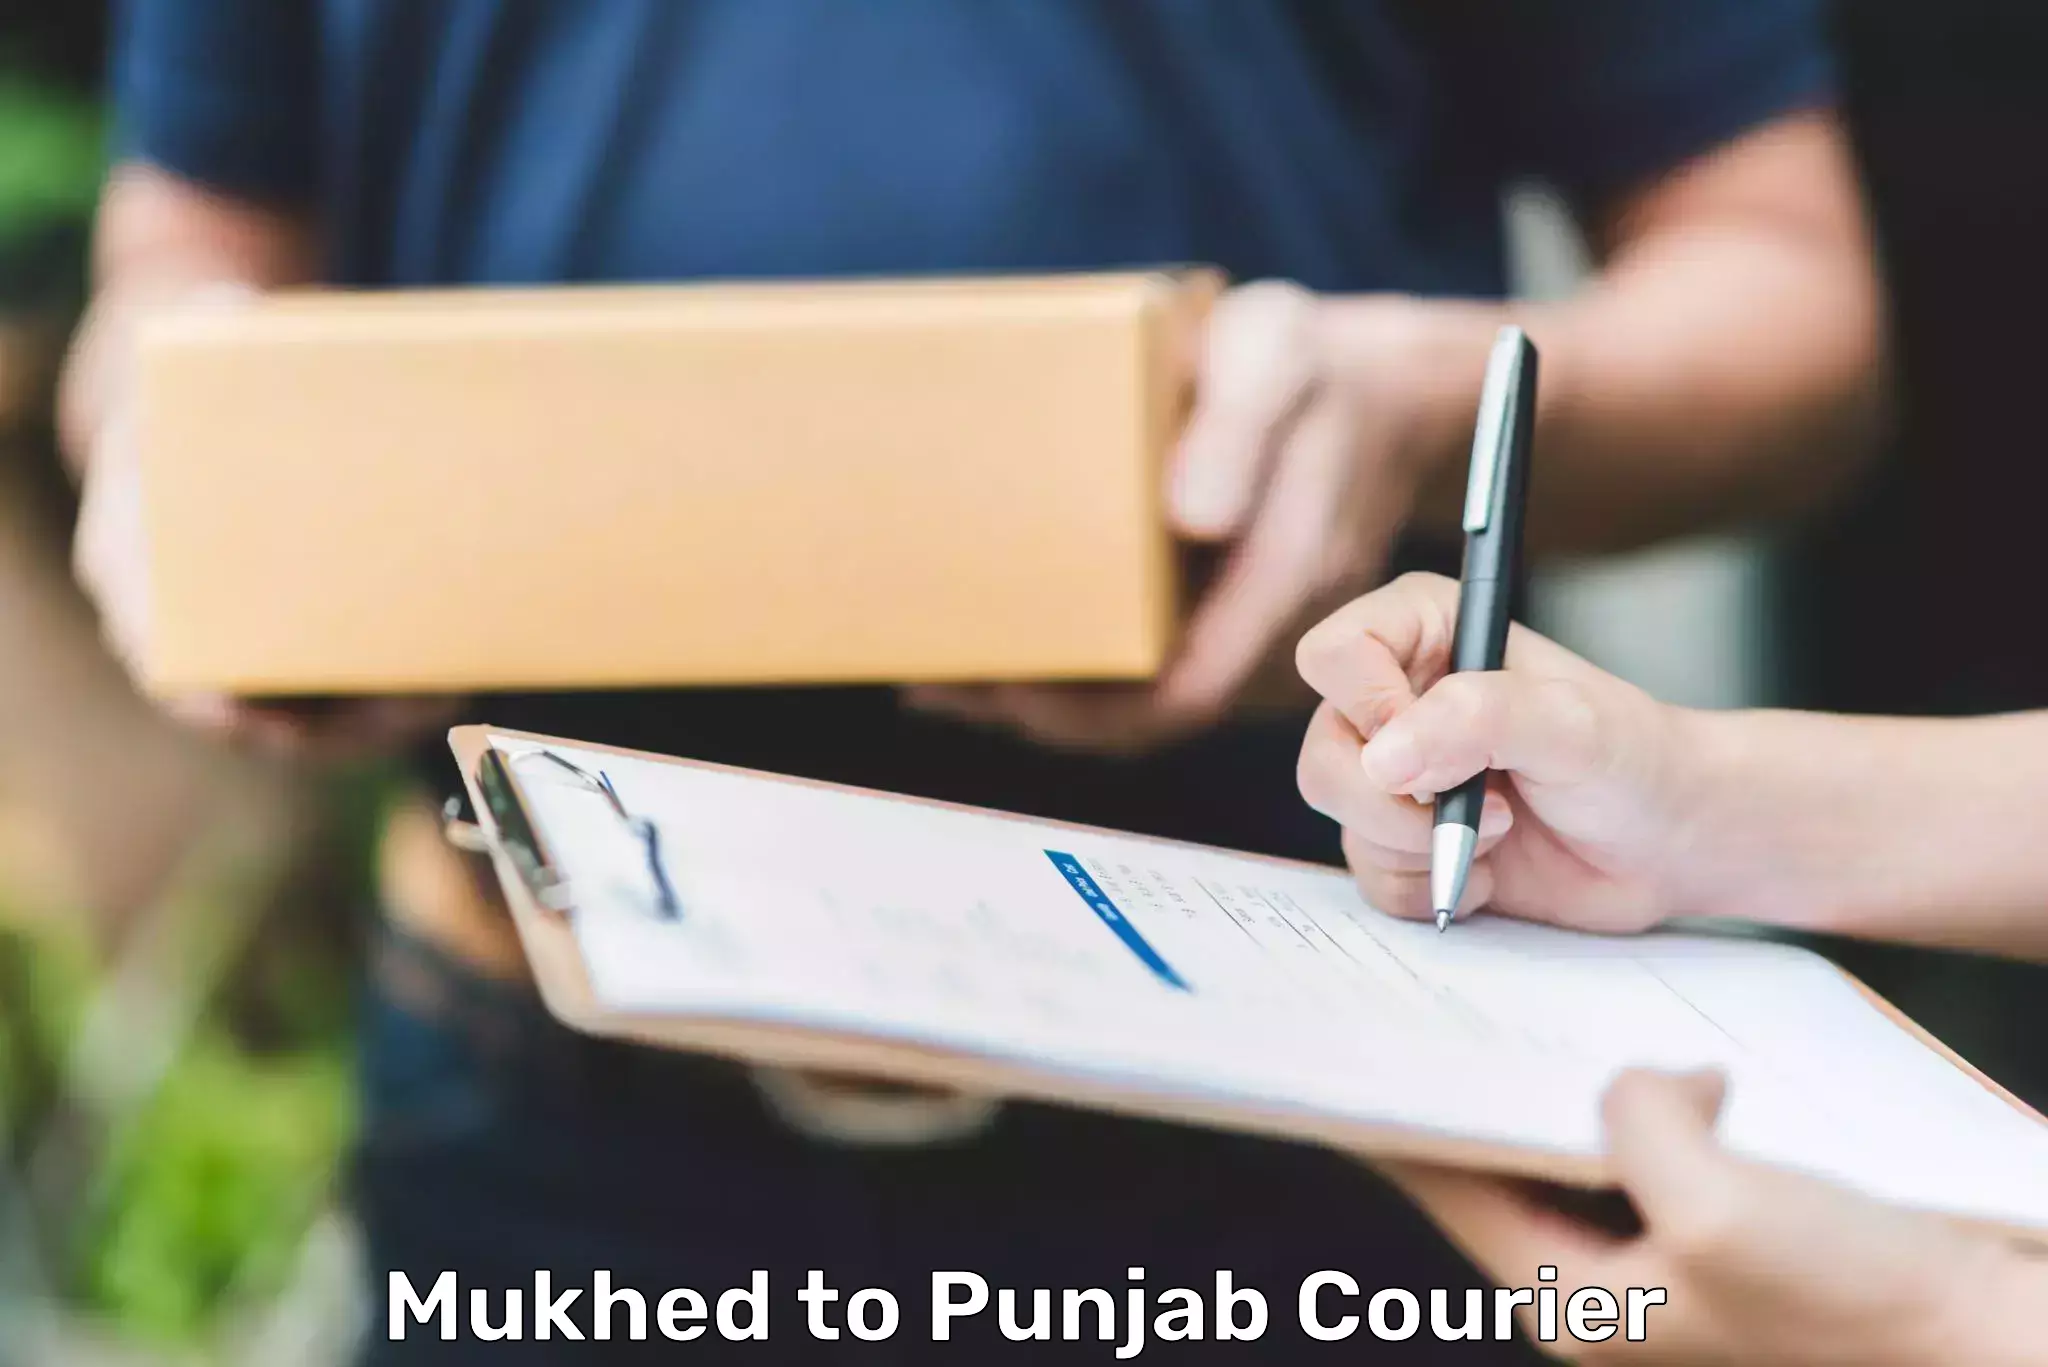 Rapid shipping services Mukhed to Jalandhar